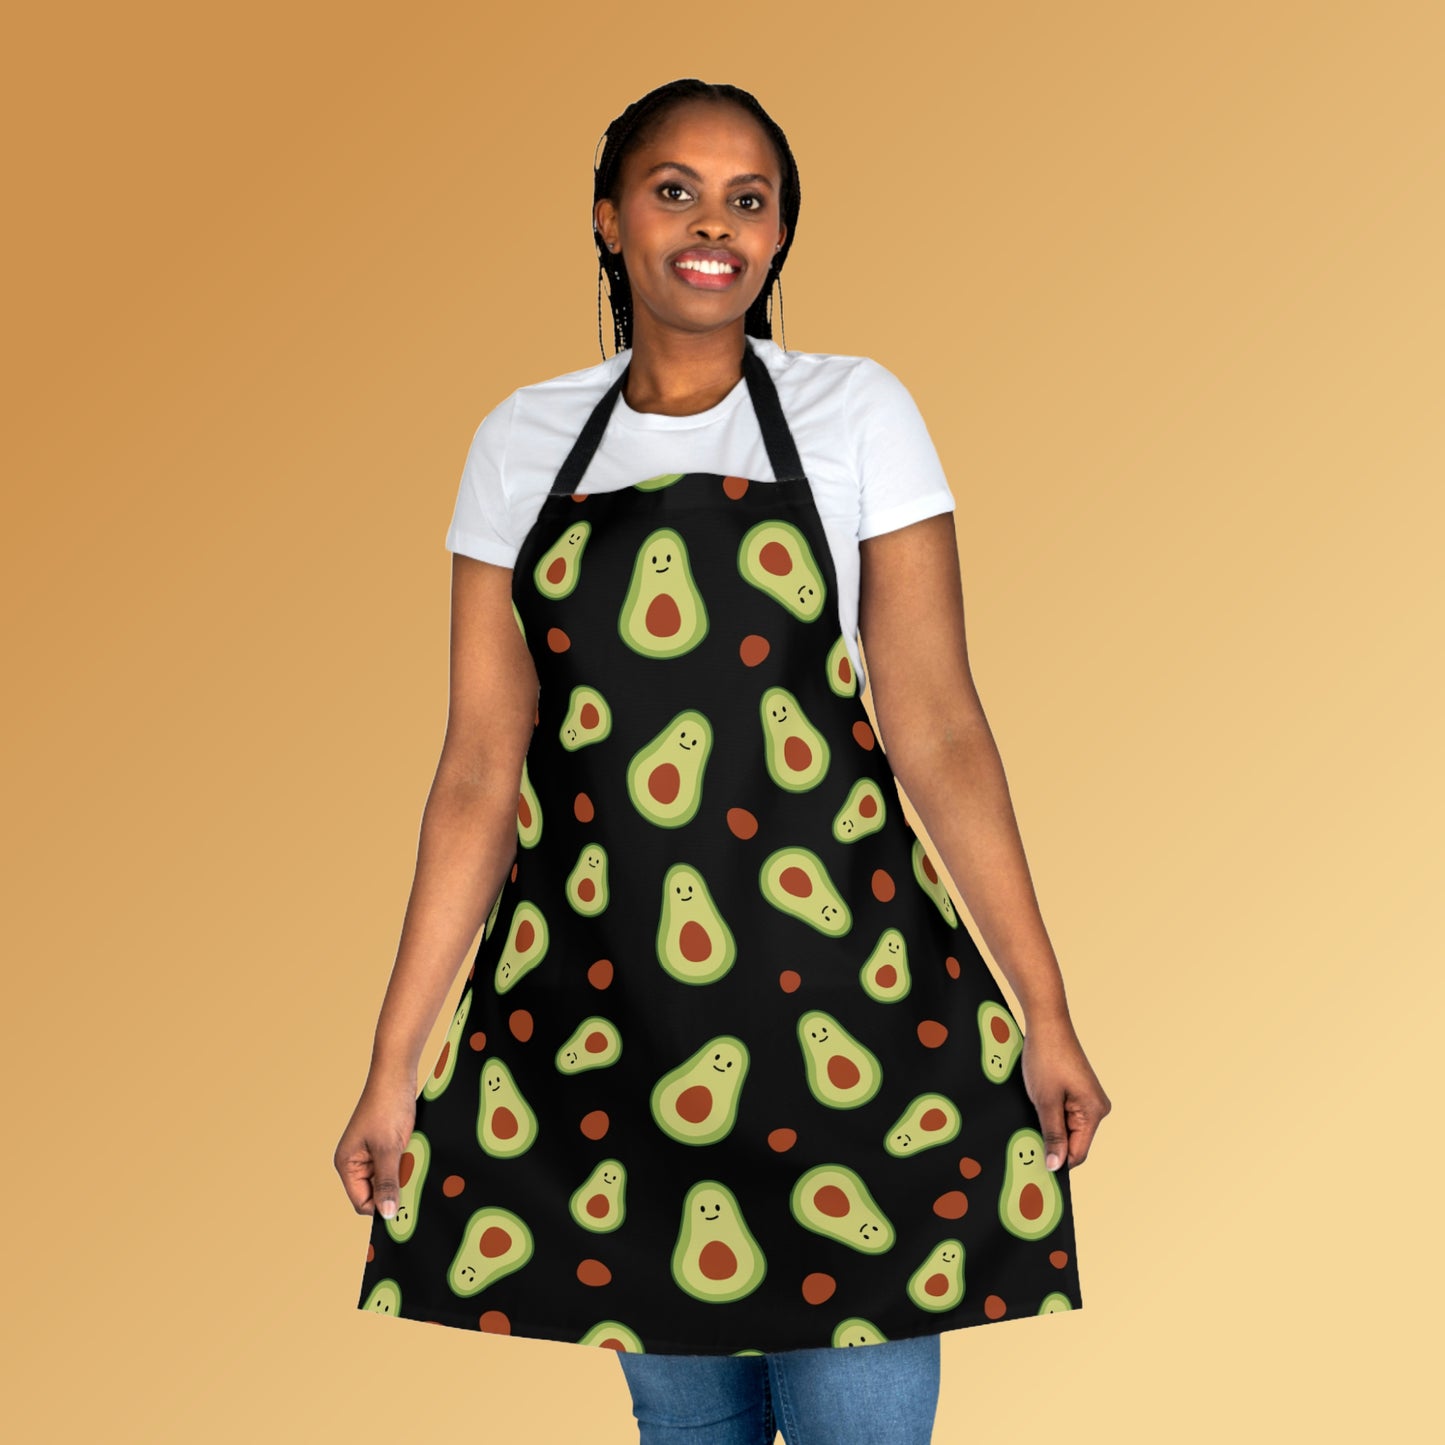 Mock up of the front of the apron worn by a woman of color